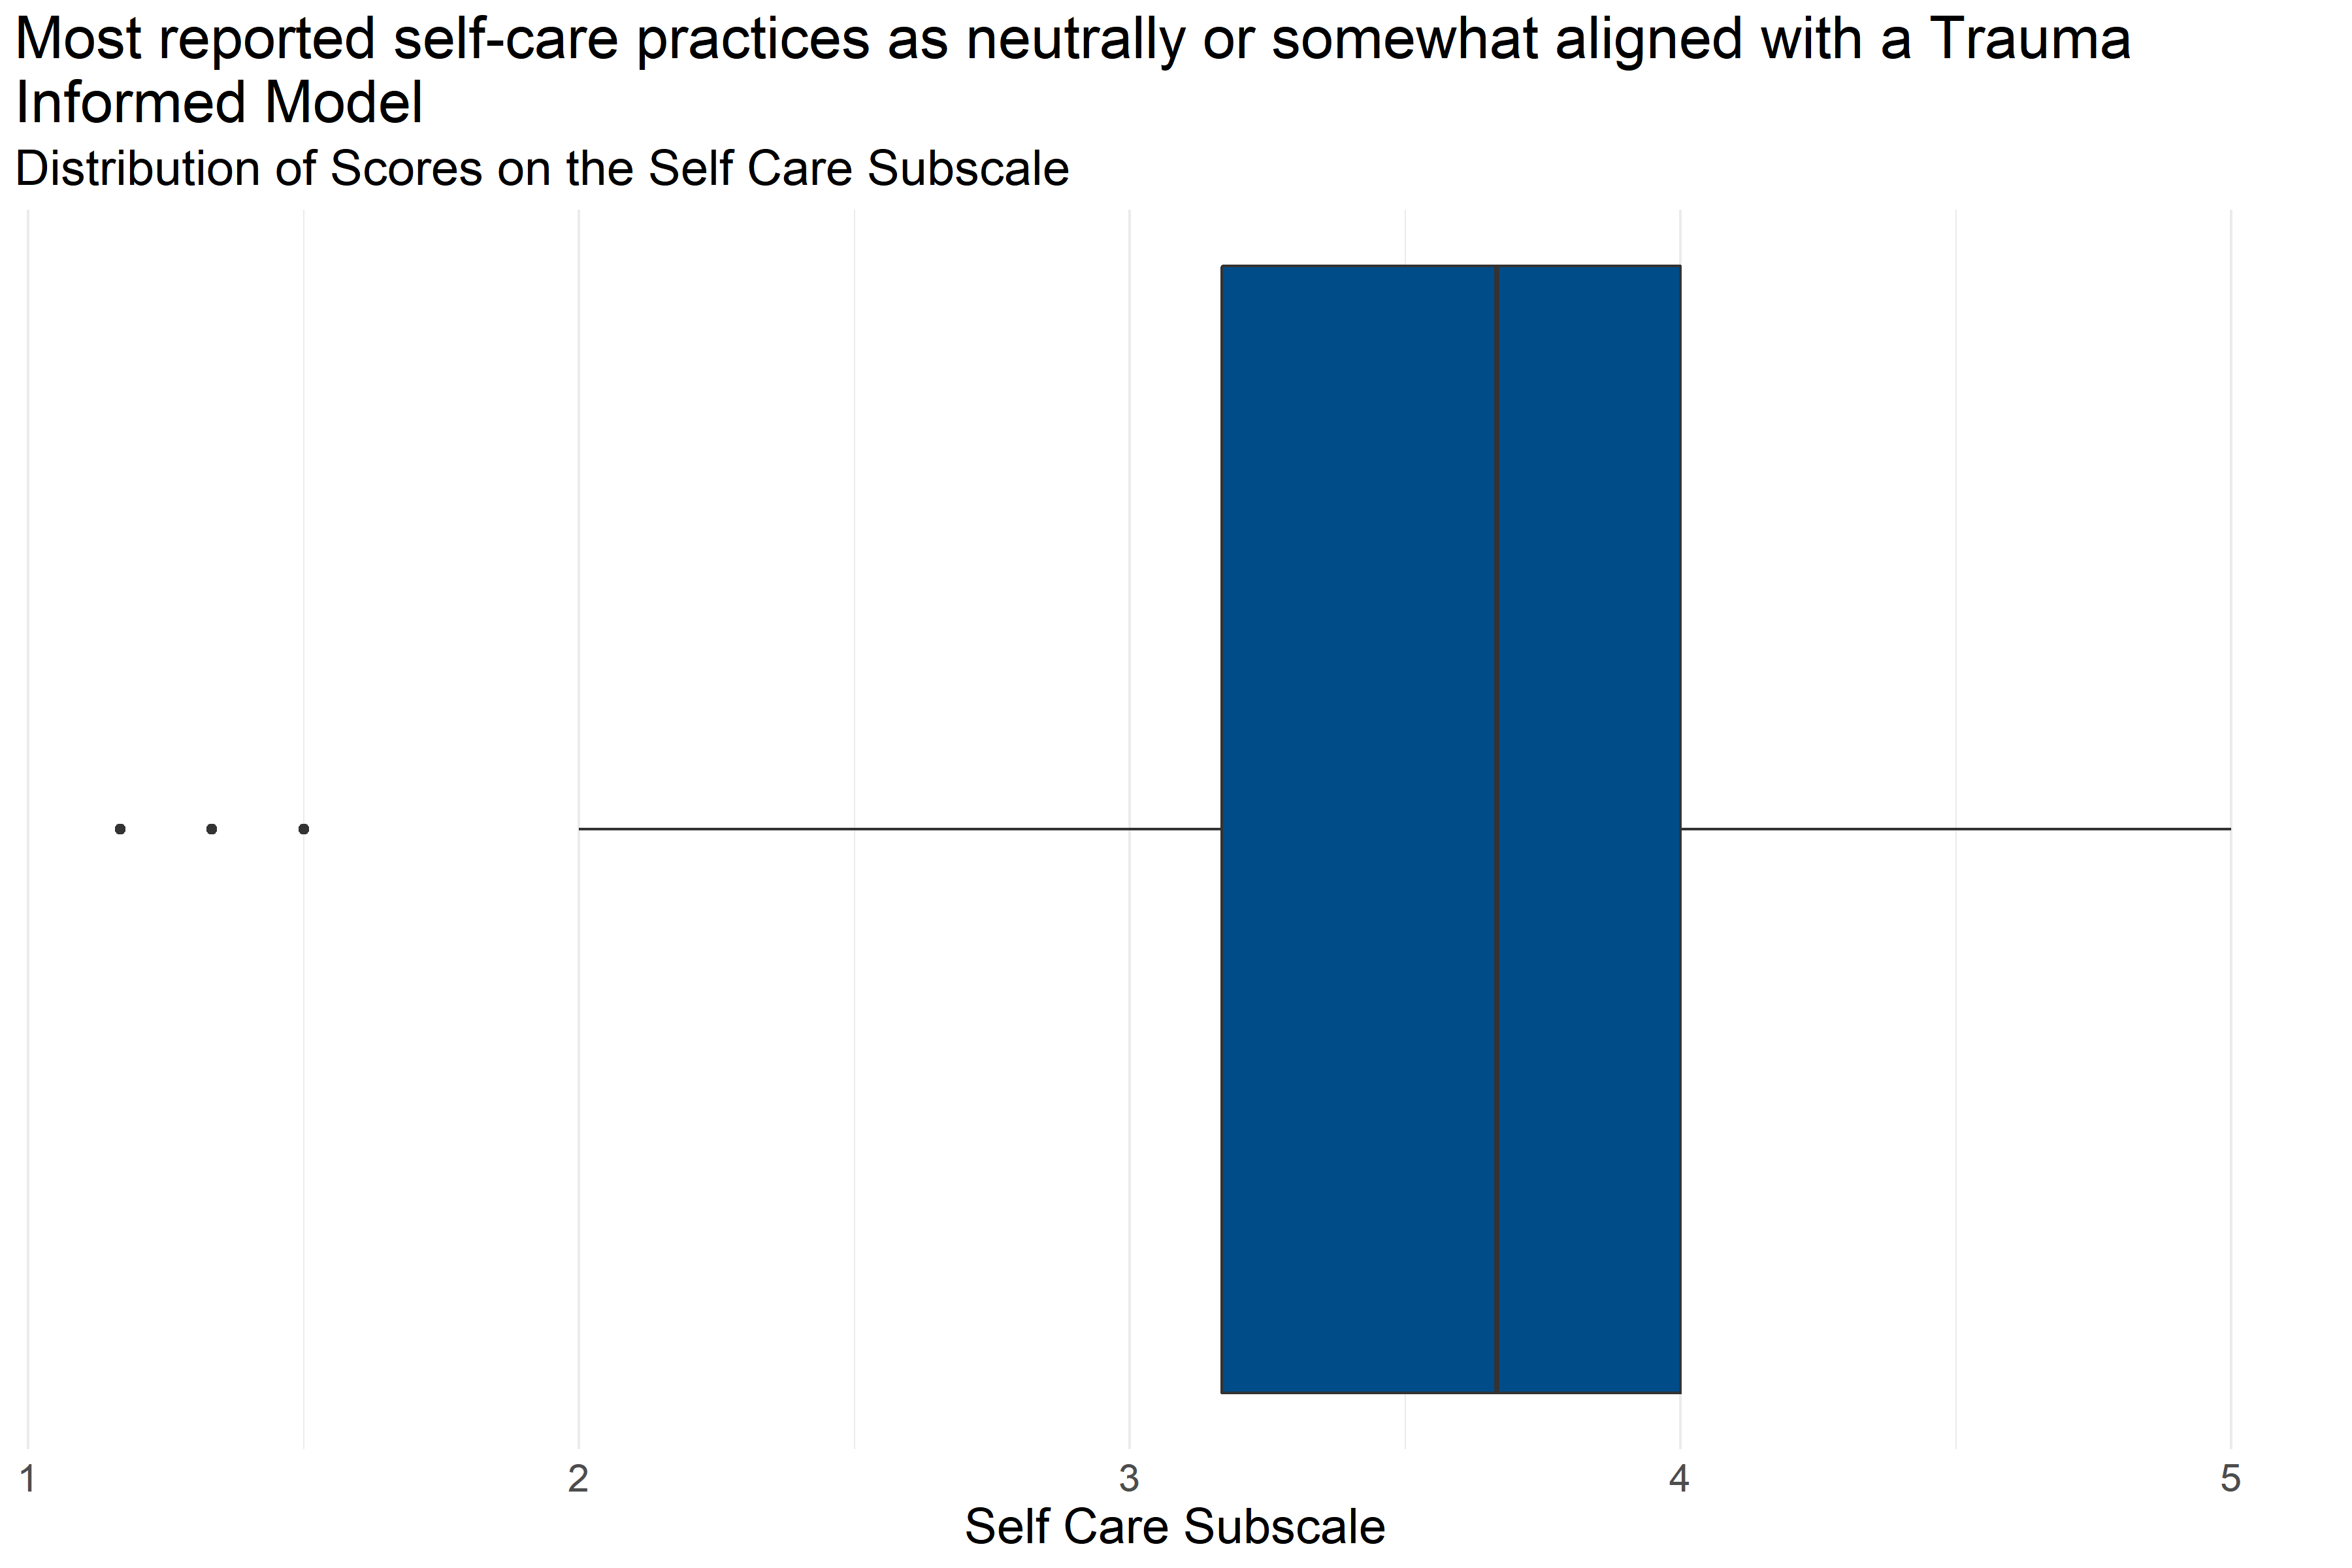 Boxplot of score distributions for Self Care Subscale